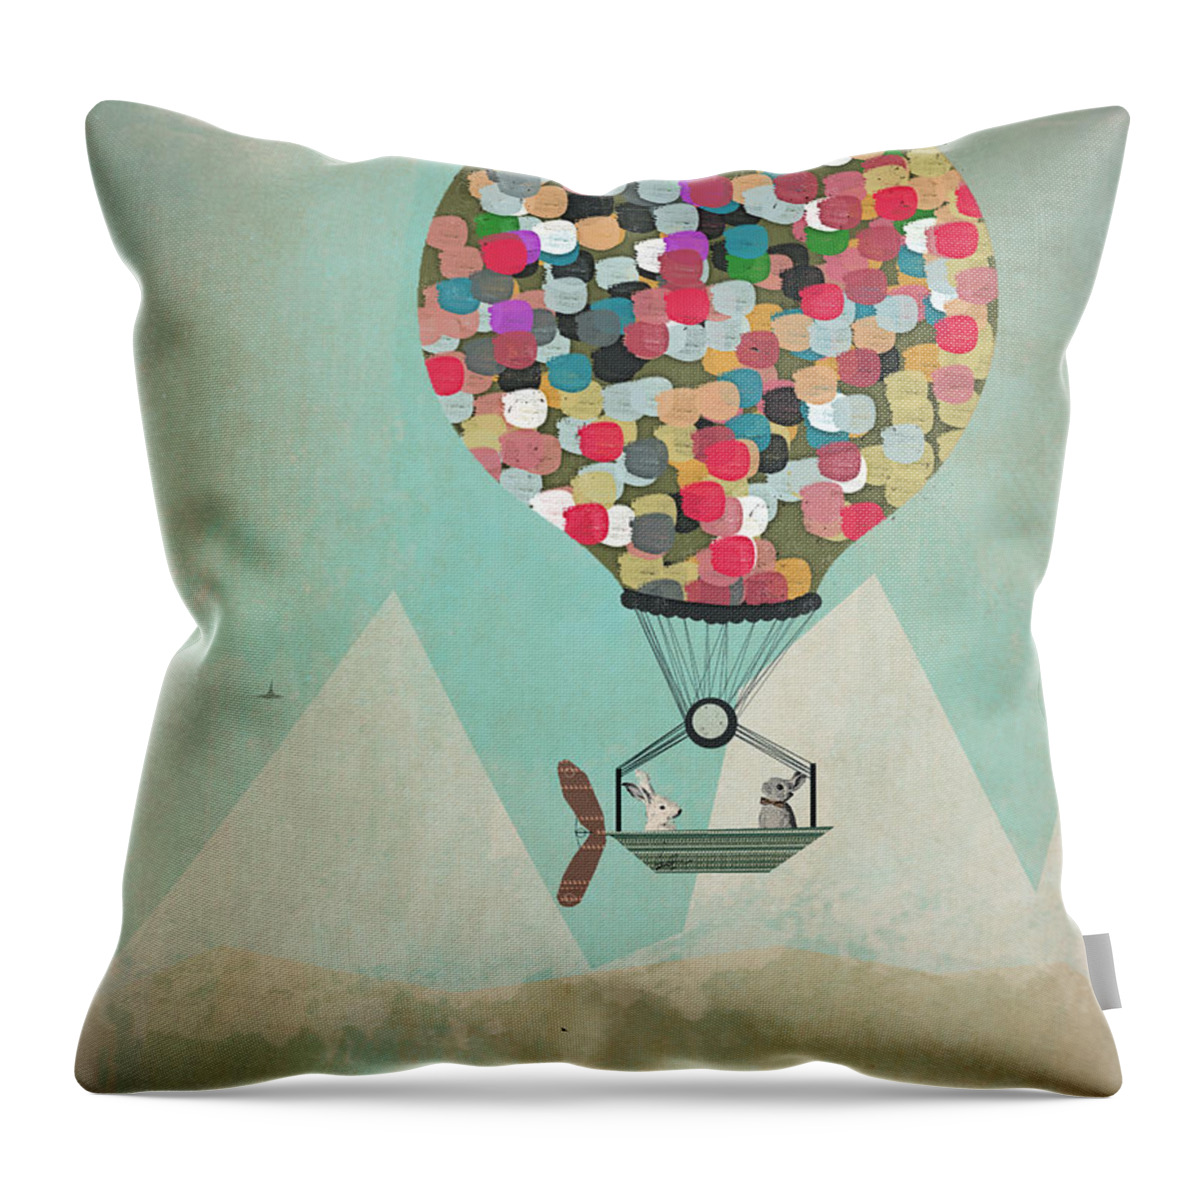 Adventure Throw Pillow featuring the painting A Little Adventure by Bri Buckley